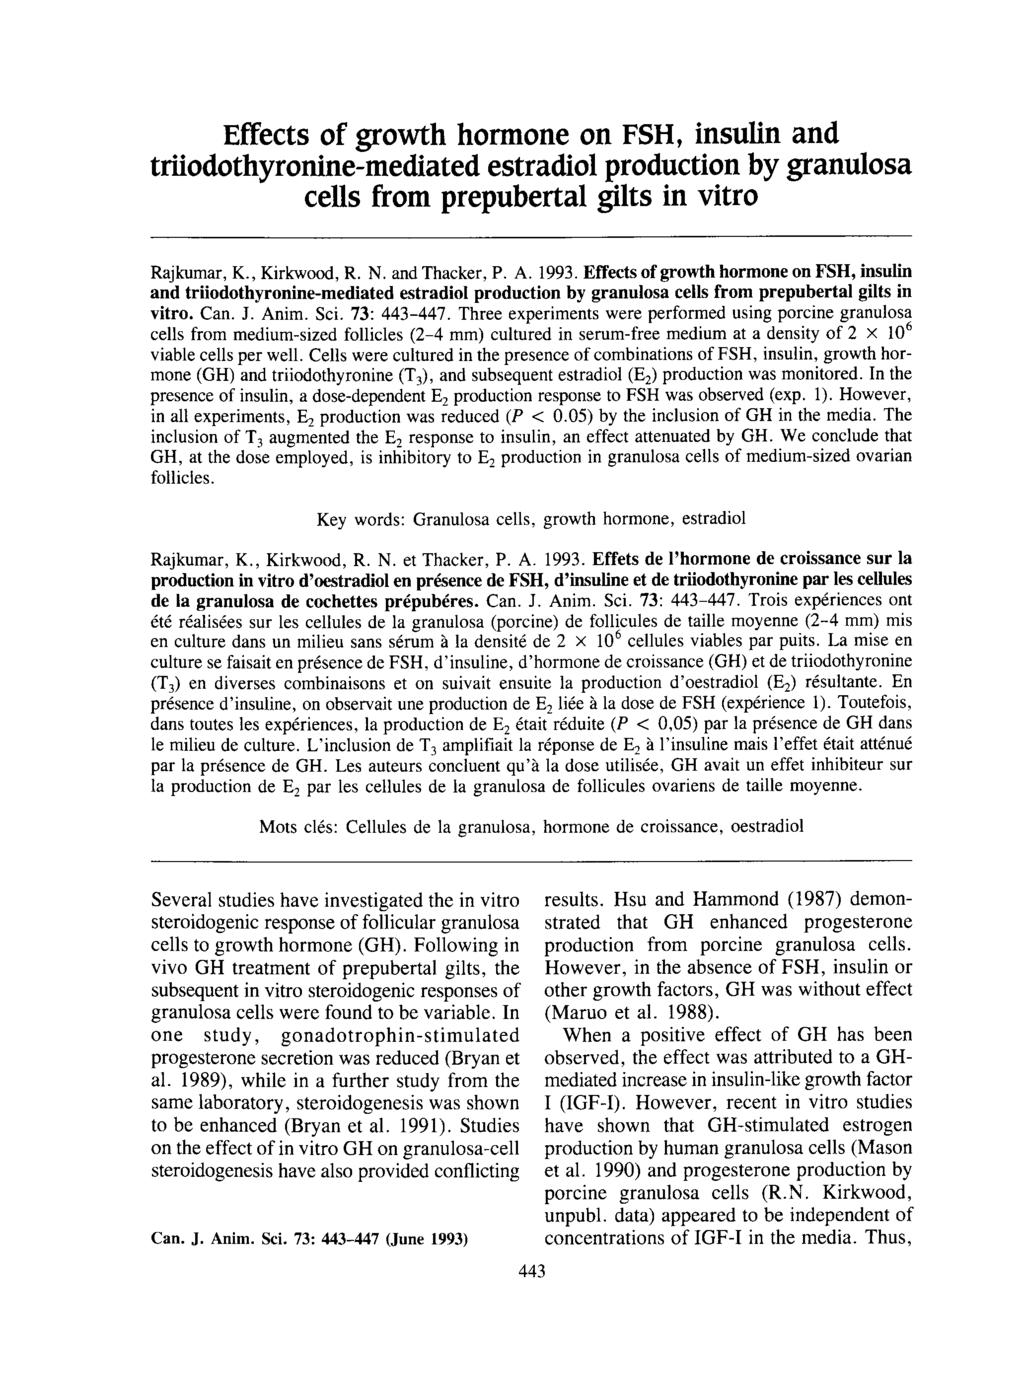 Effects of growth hormone on FSH, insulin and triiodothyronine-mediated estradiol production by granulosa cells from prepubertal gilts in vitro Rajkumar, K., Kirkwood, R. N. and Thacker, P. A. 1993.